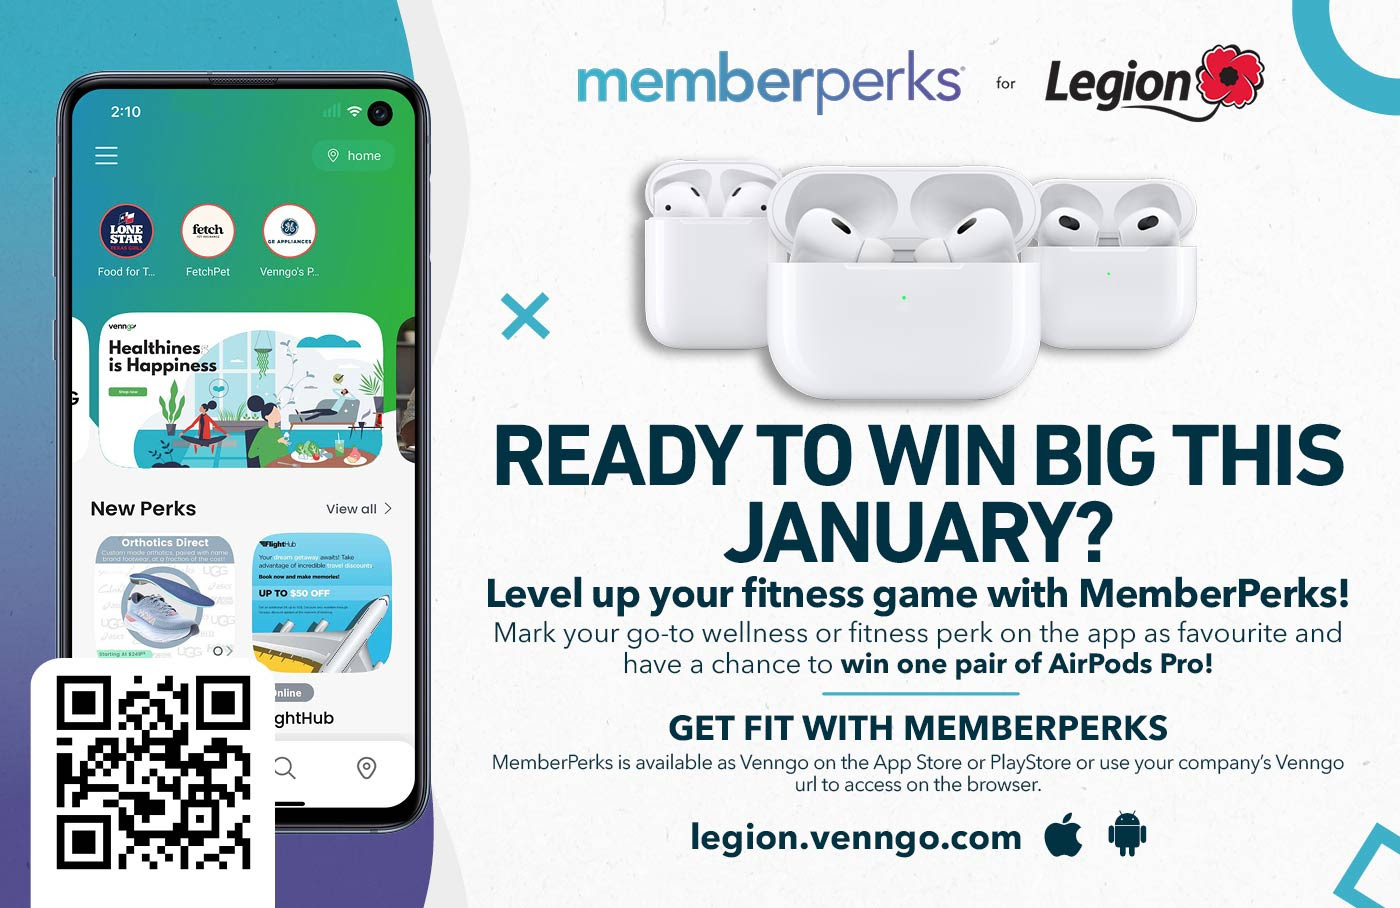 Ready to win big this January?